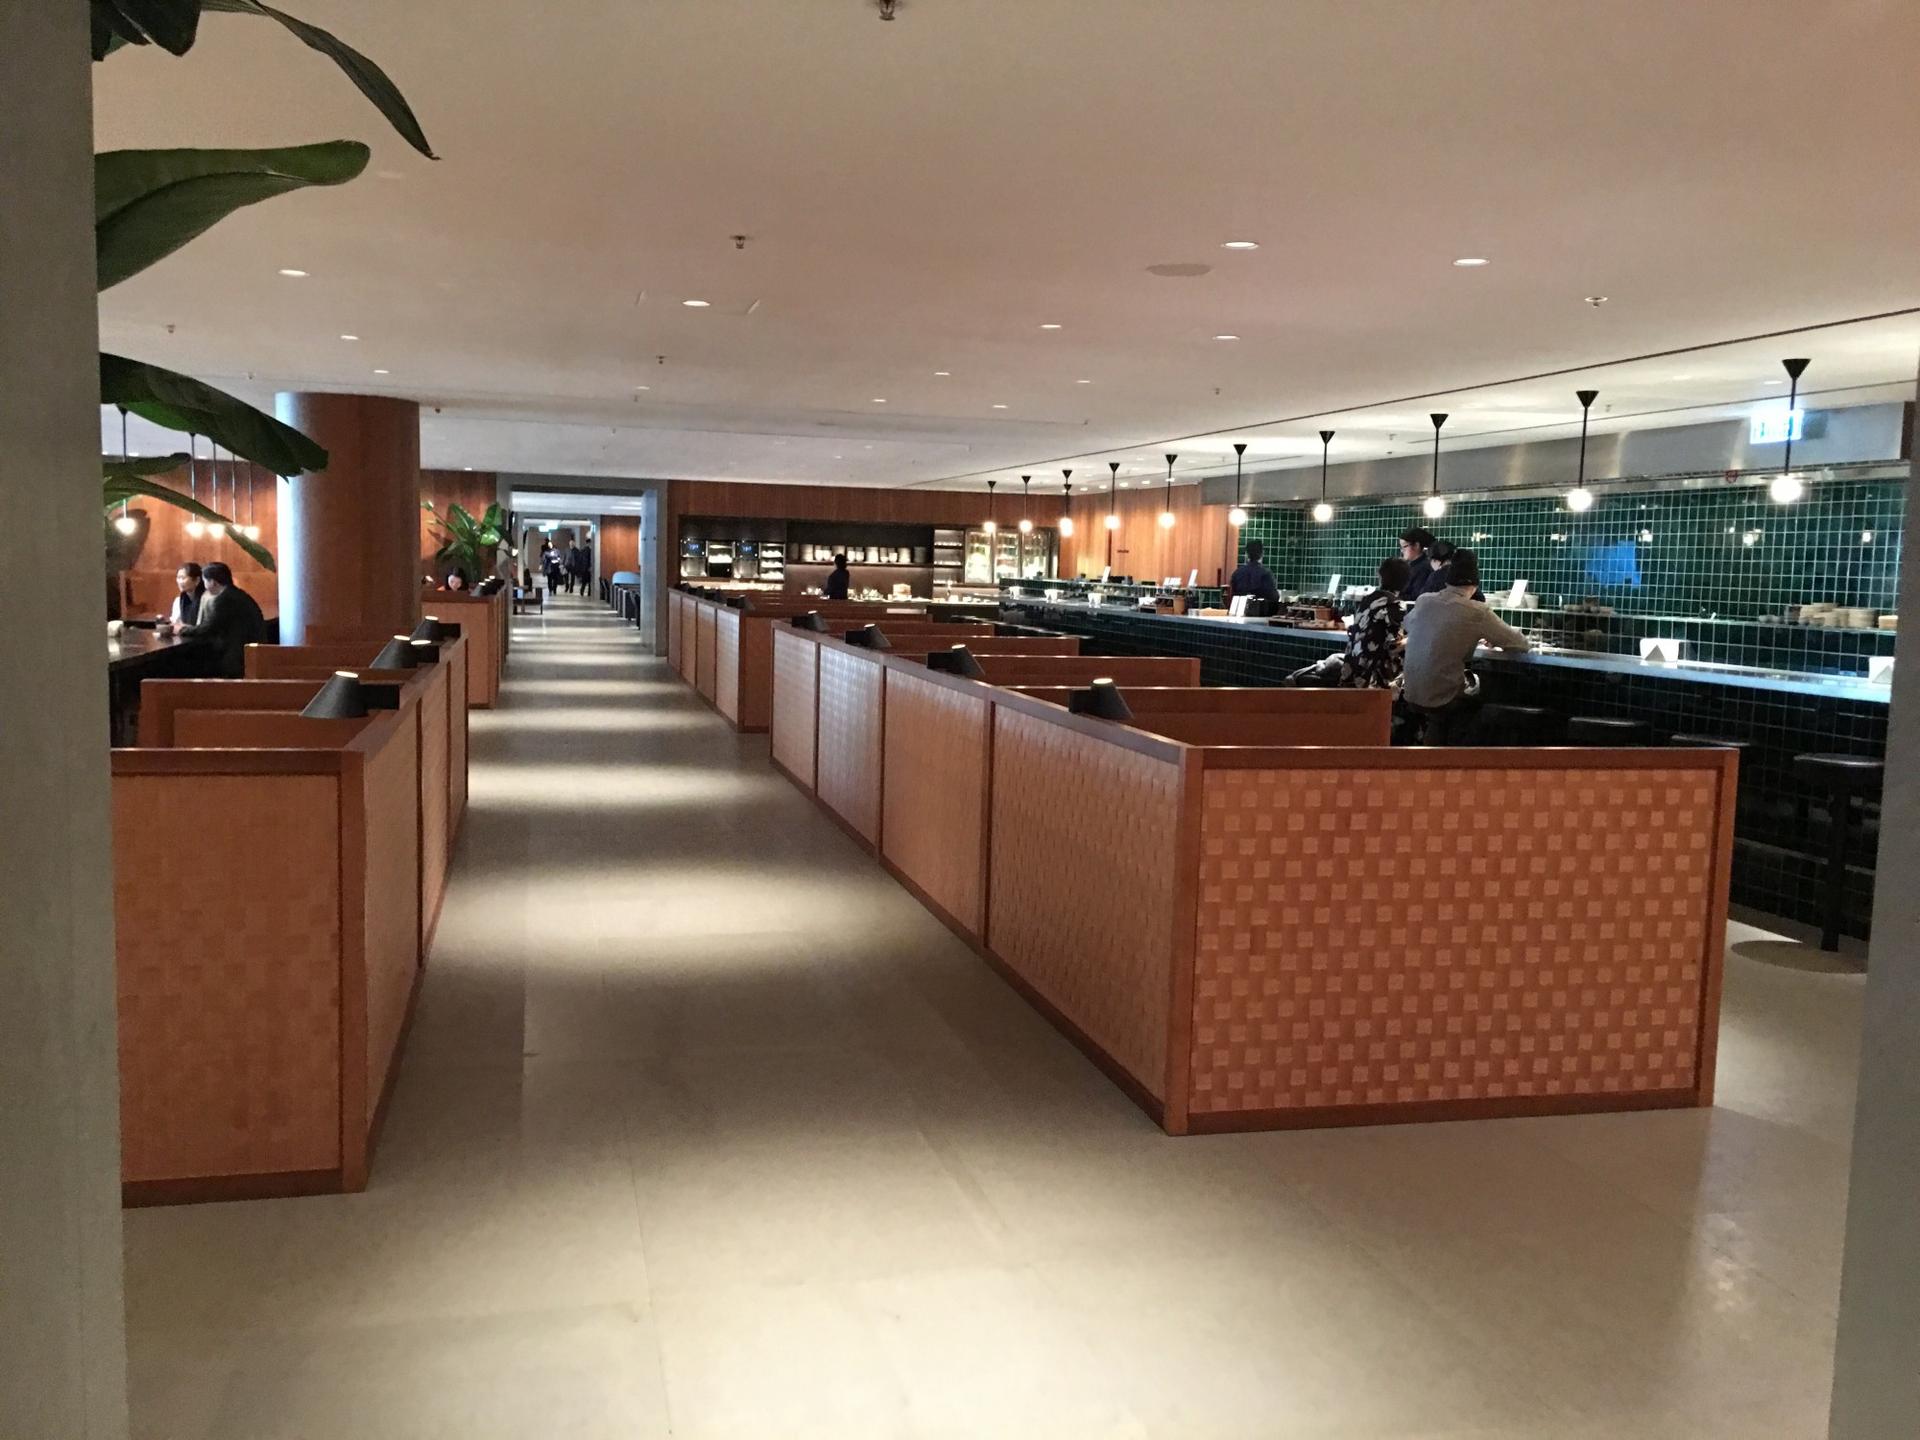 Cathay Pacific The Pier Business Class Lounge image 25 of 61